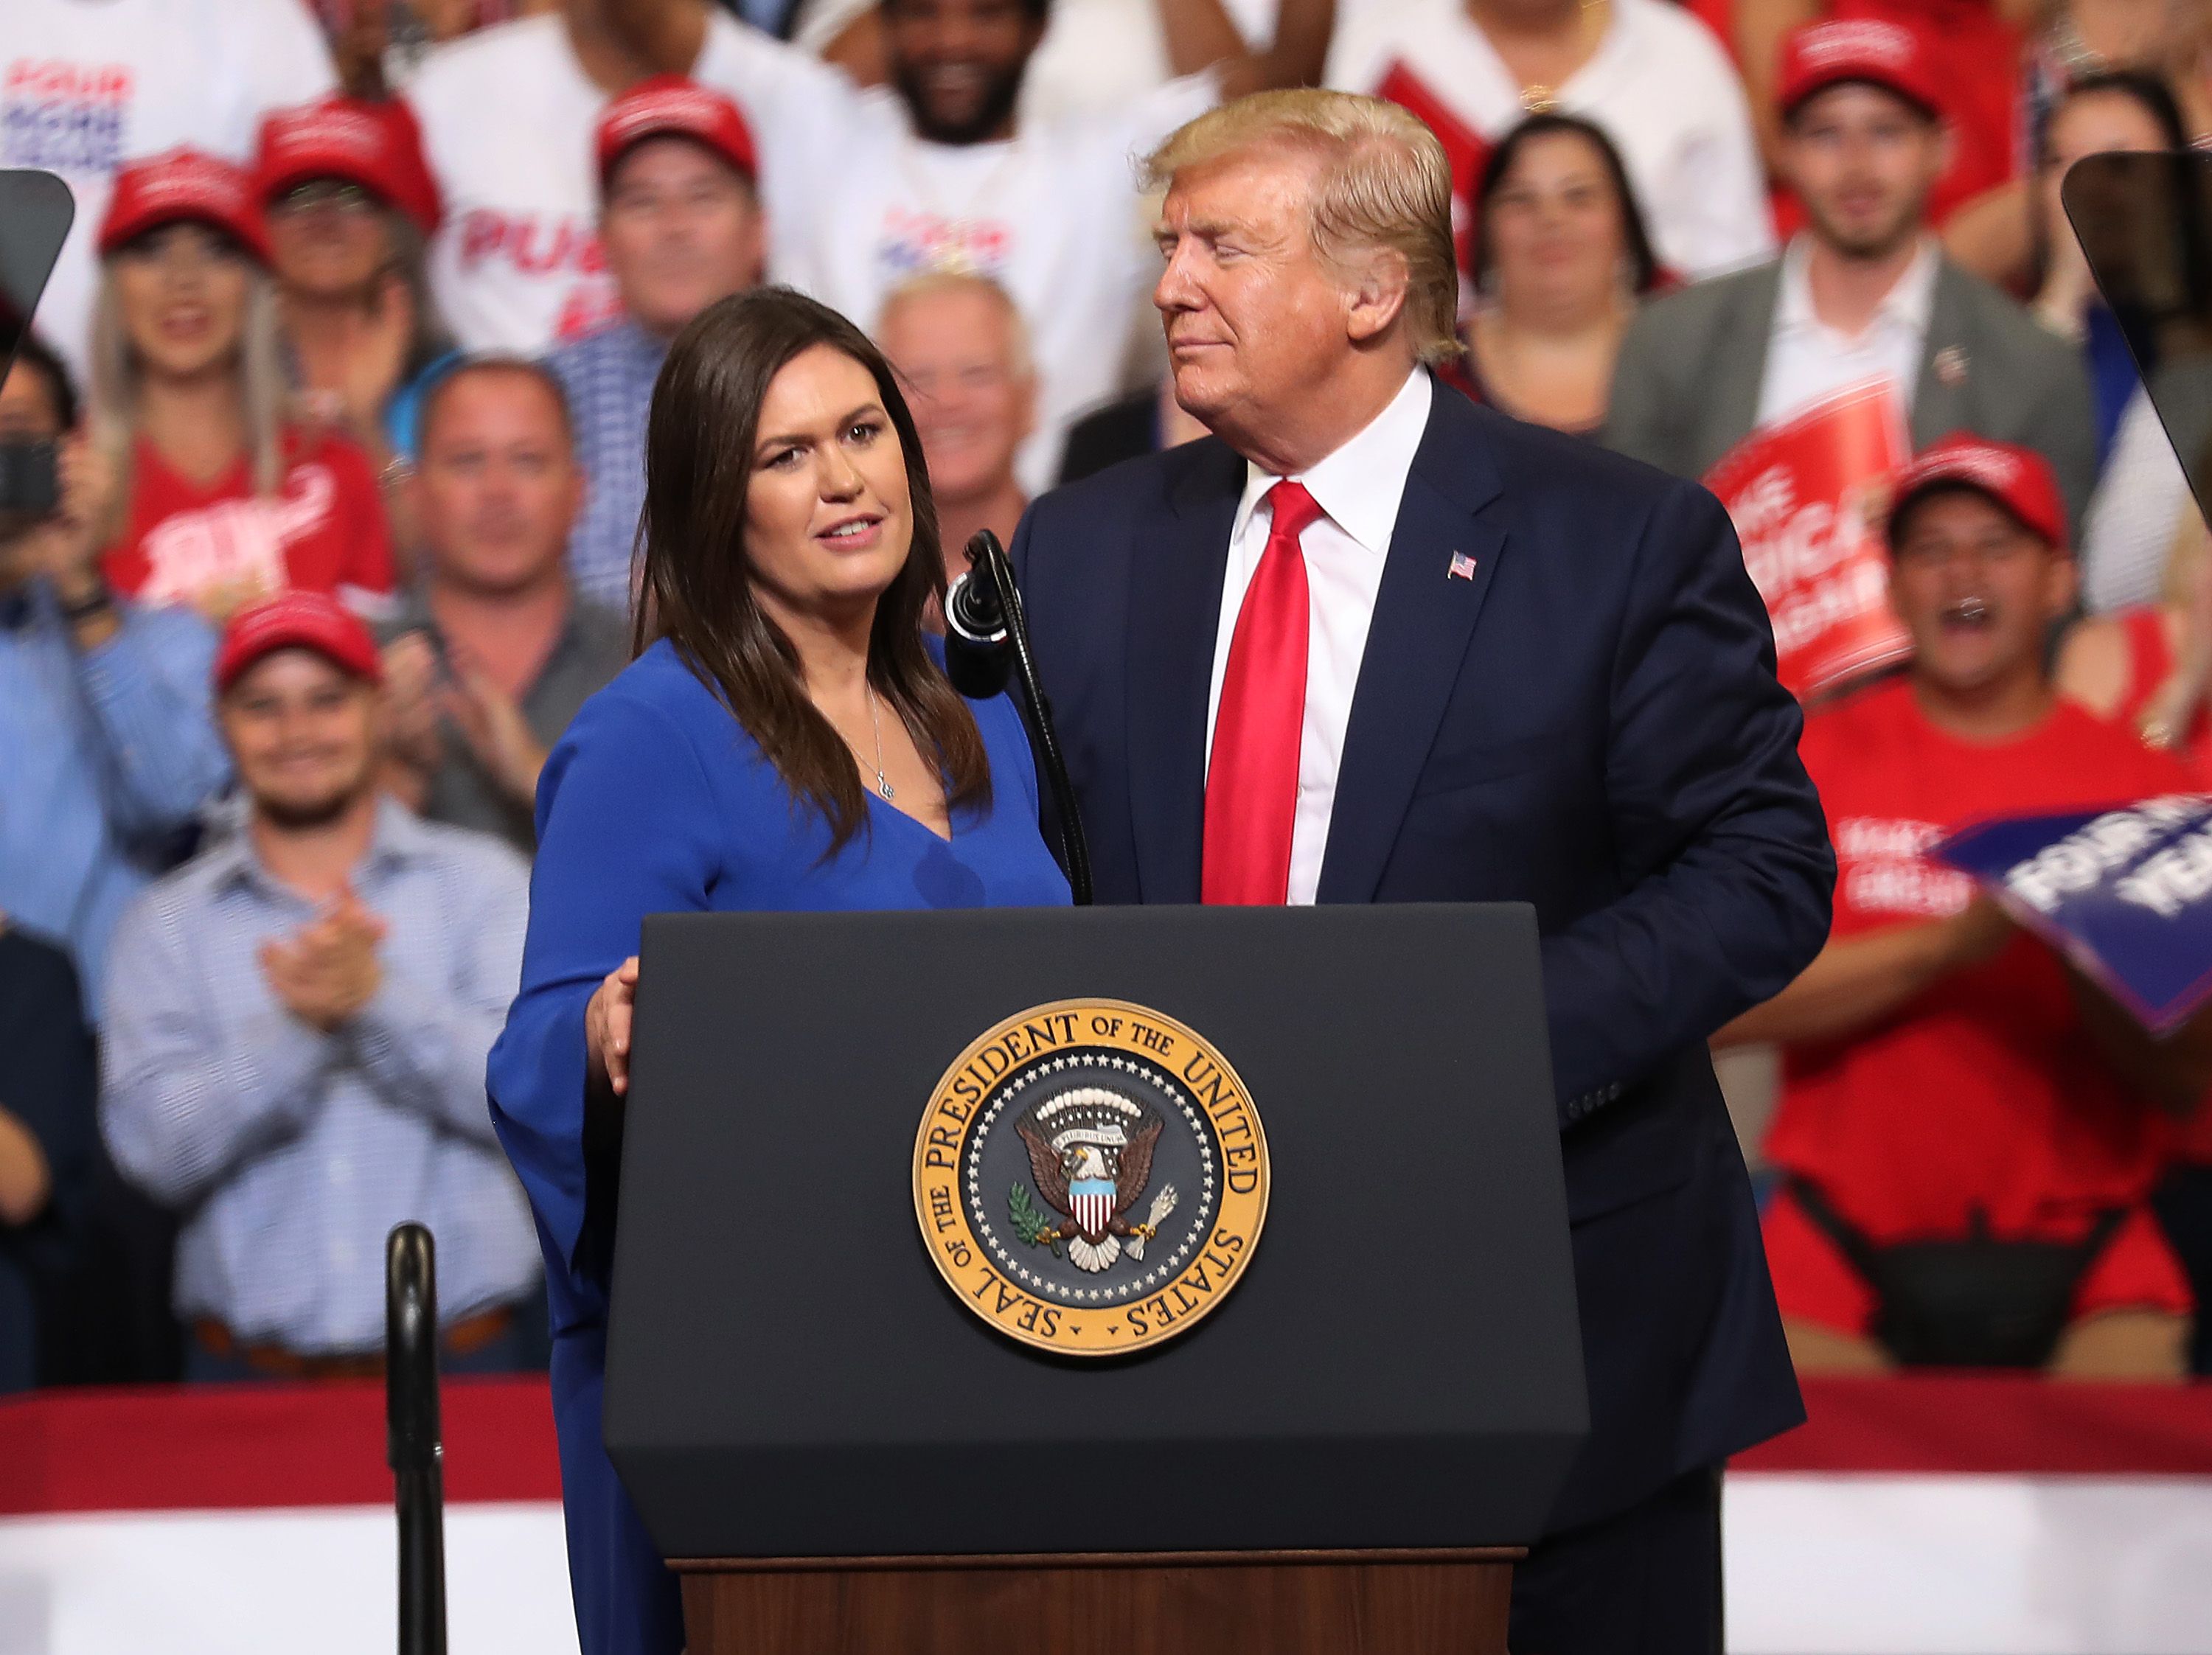 Trump stands with Sarah Huckabee Sanders, who announced that she is stepping down as the White House press secretary.